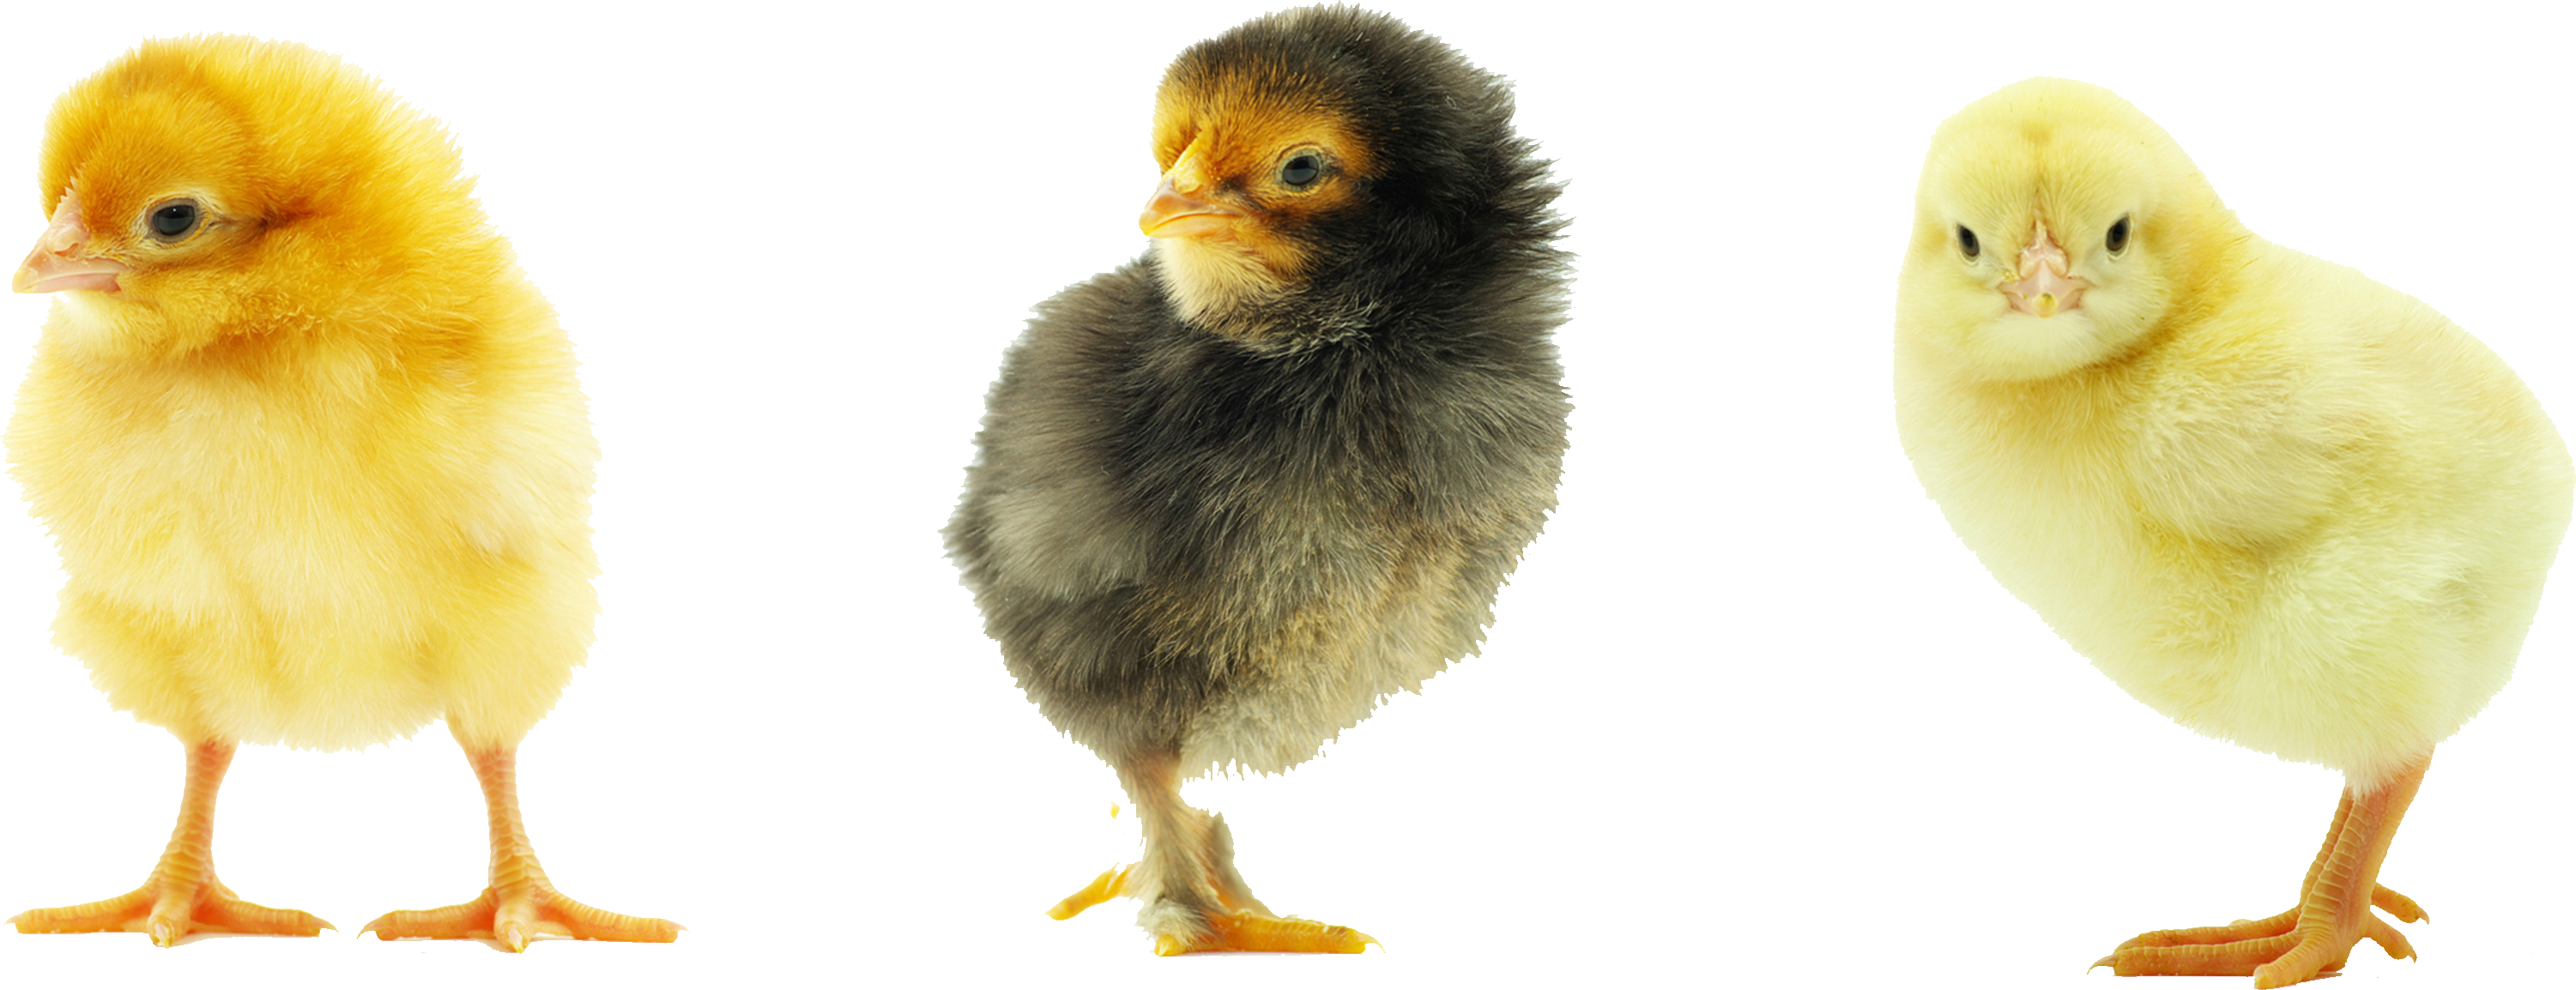 Baby Chicken Transparent Background - Chiken, Transparent background PNG HD thumbnail